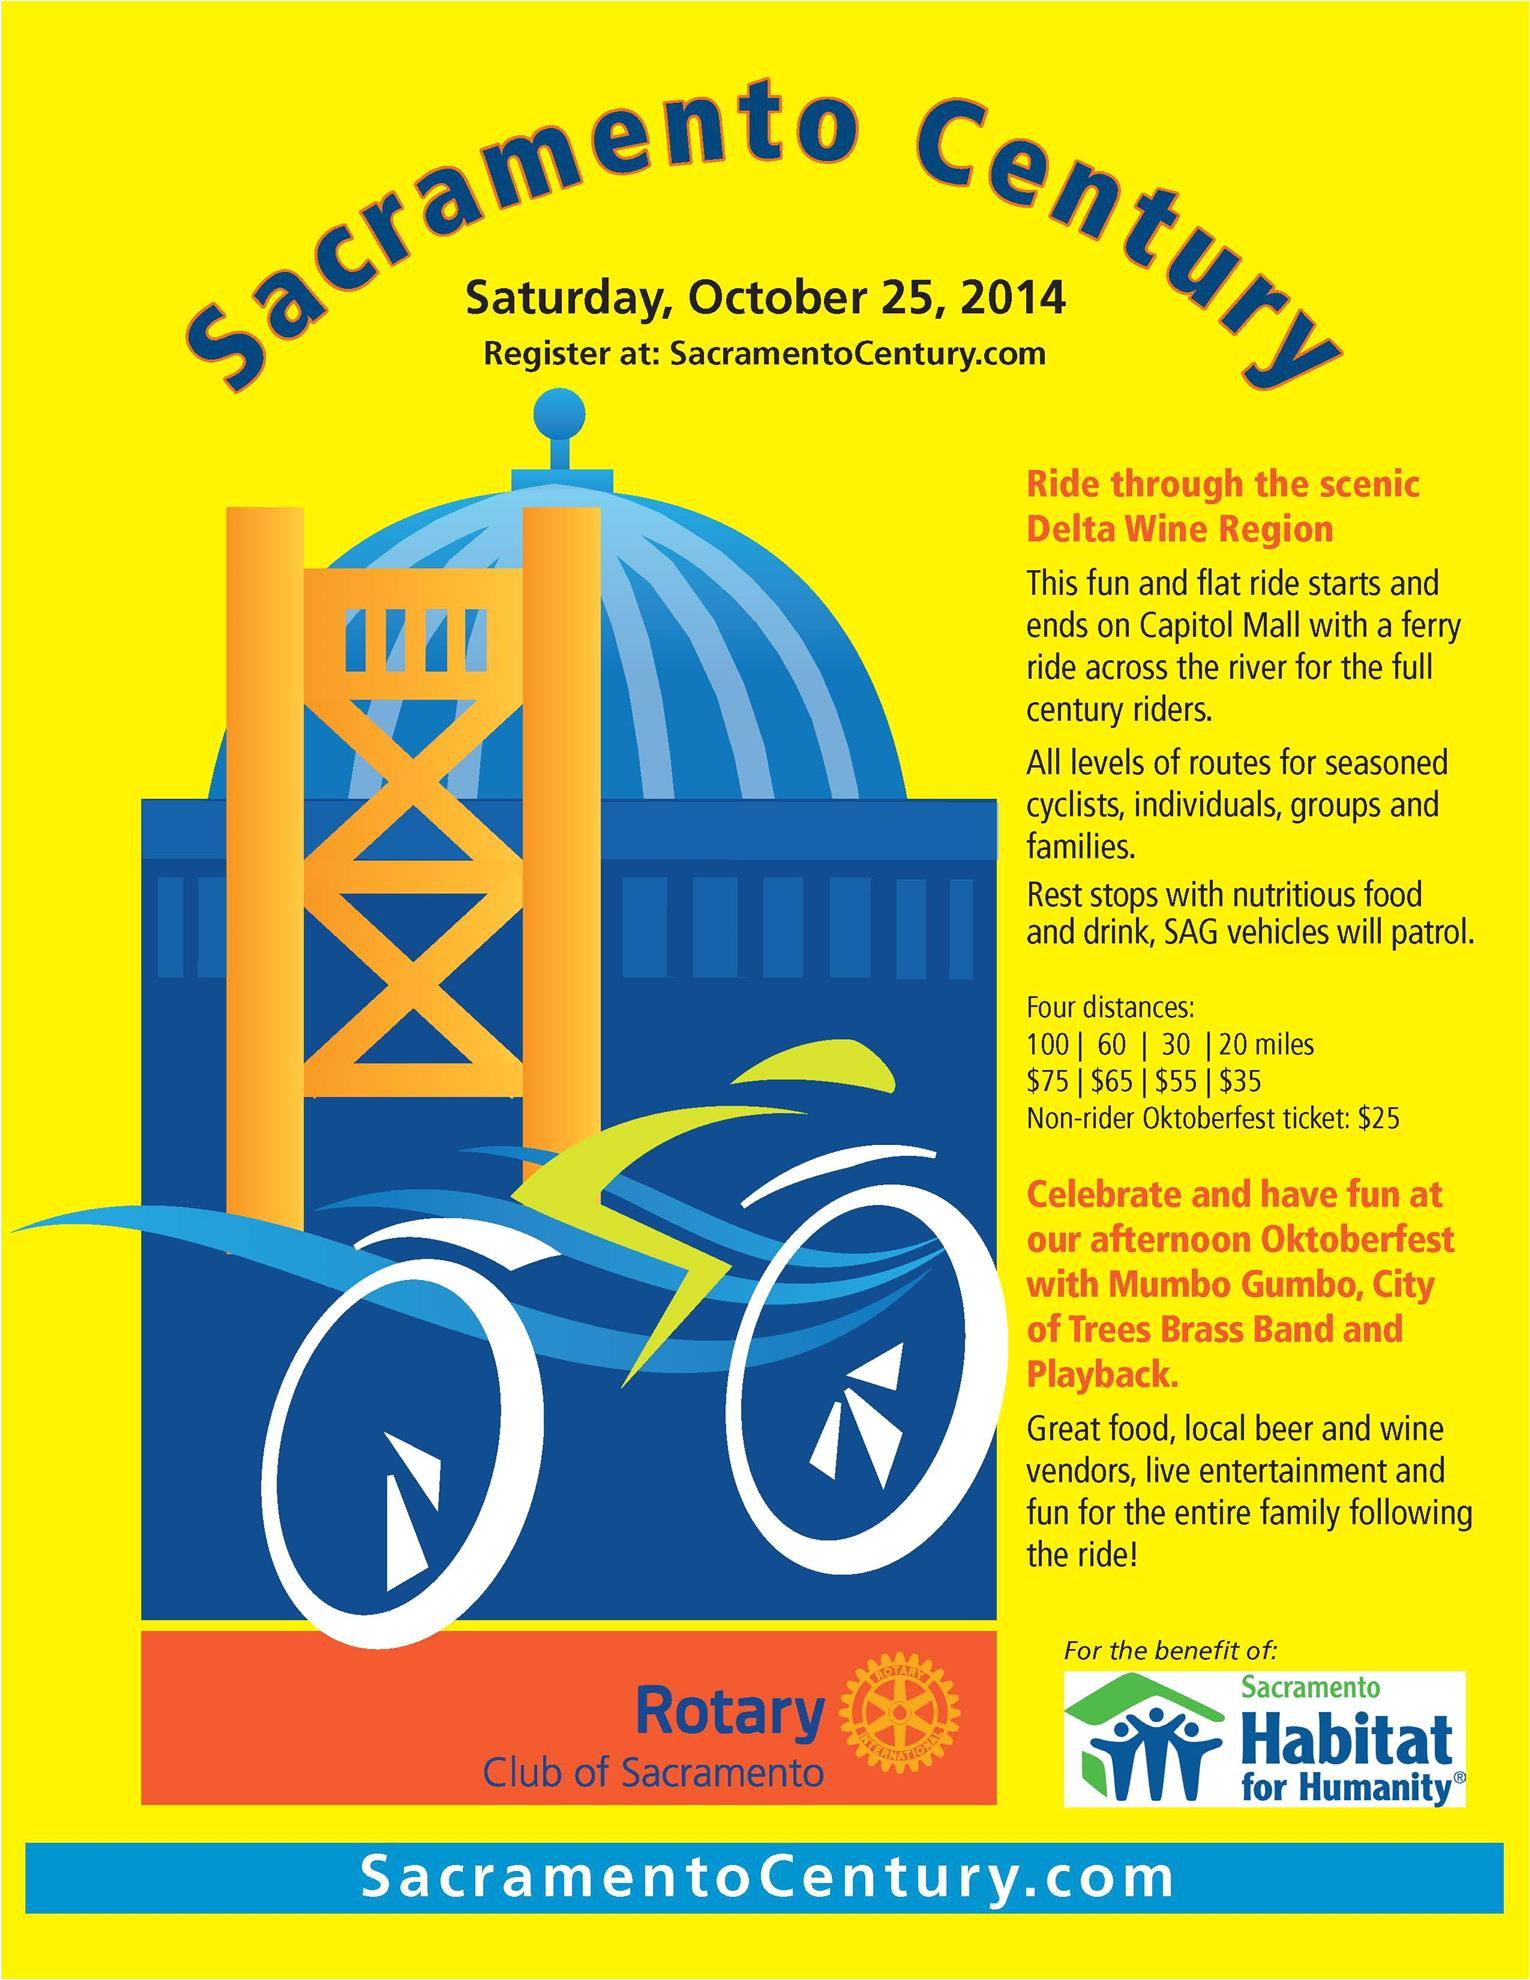 the rotary club of sacramento is pleased to announce its inaugural sacramento century bicycle ride taking place on saturday october 25 2014 on capitol